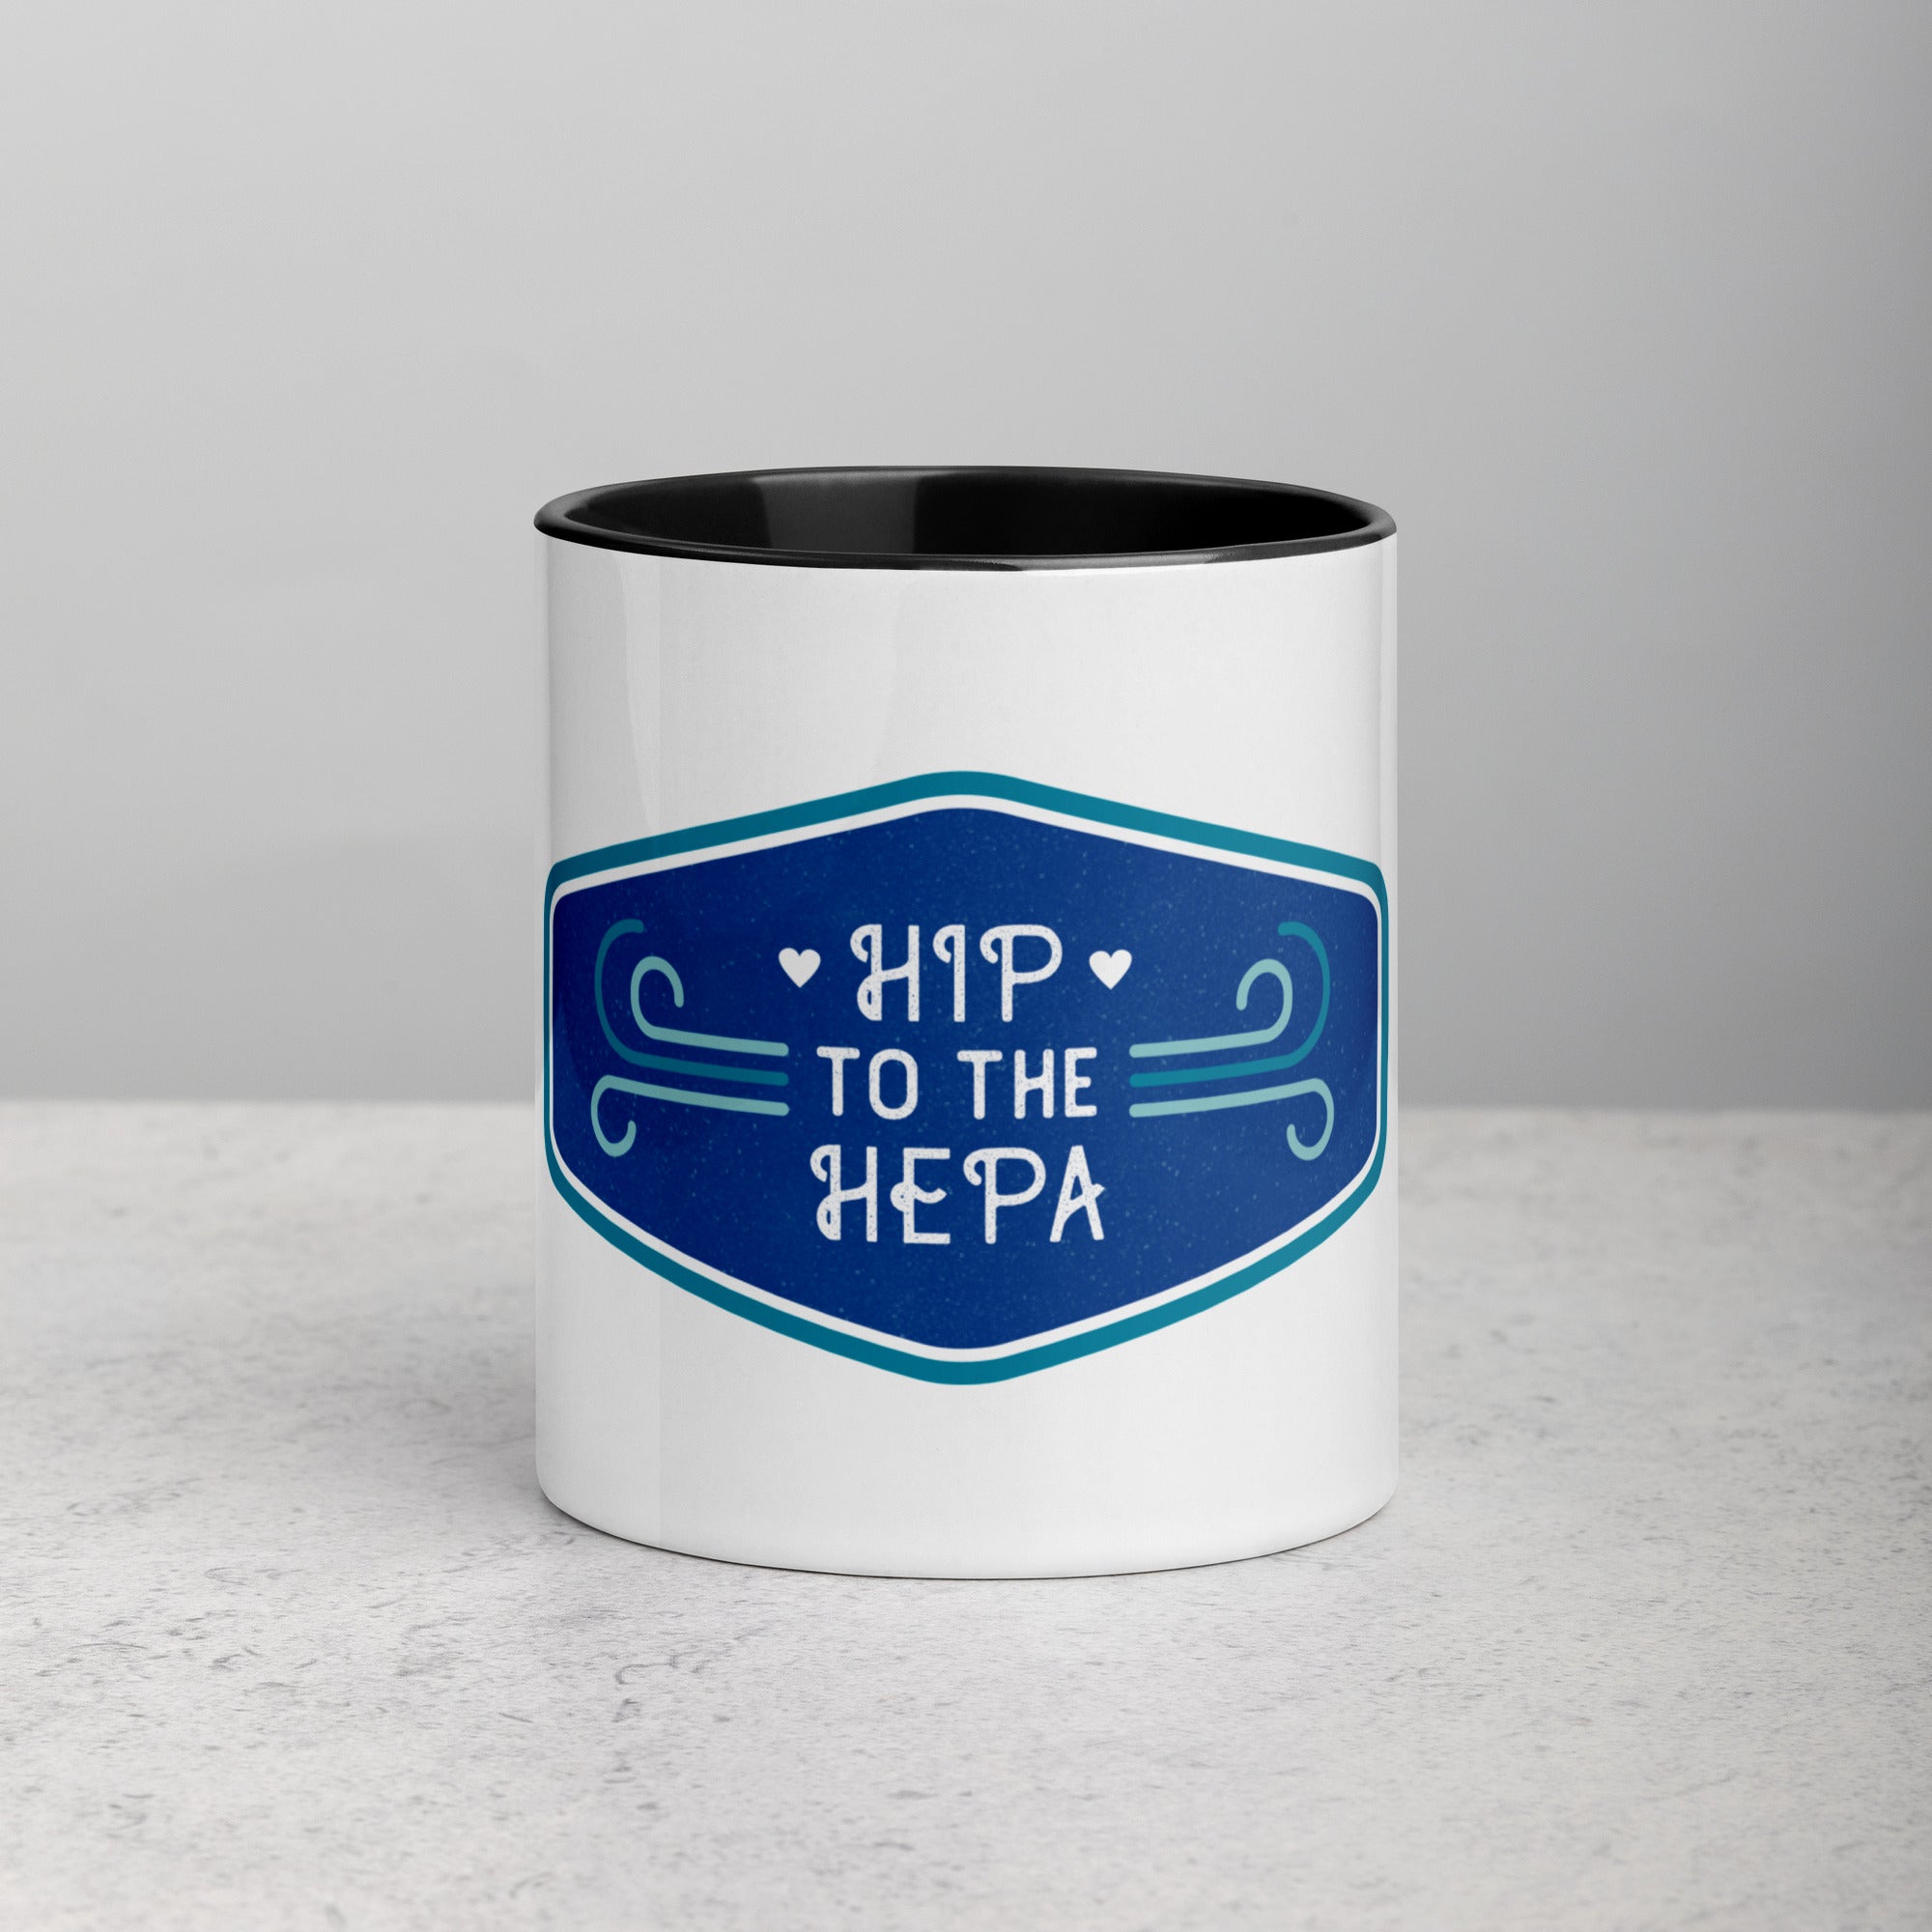 front facing white mug with black interior and handle. Mug has blue logo image with text 'hip to the hepa'